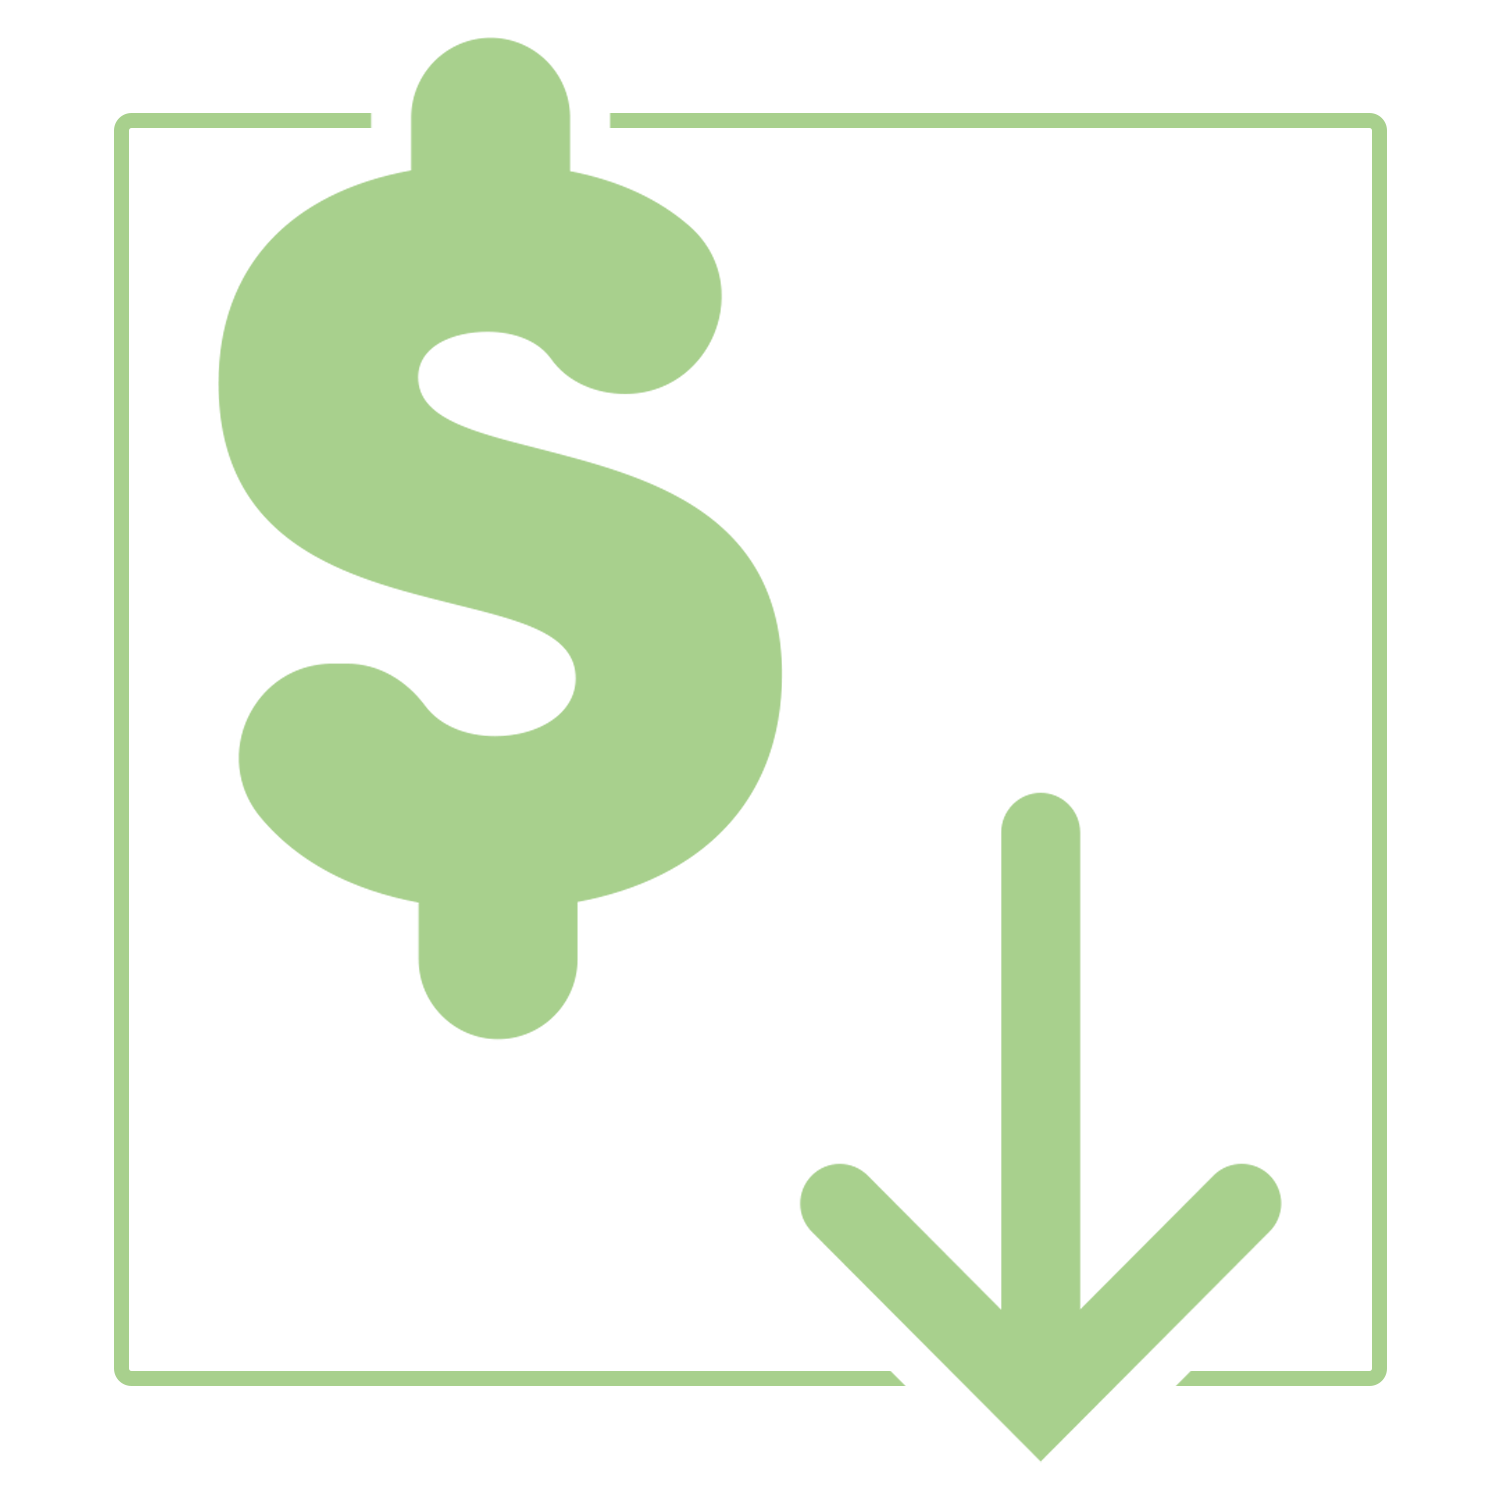 dollar sign with arrow pointing down